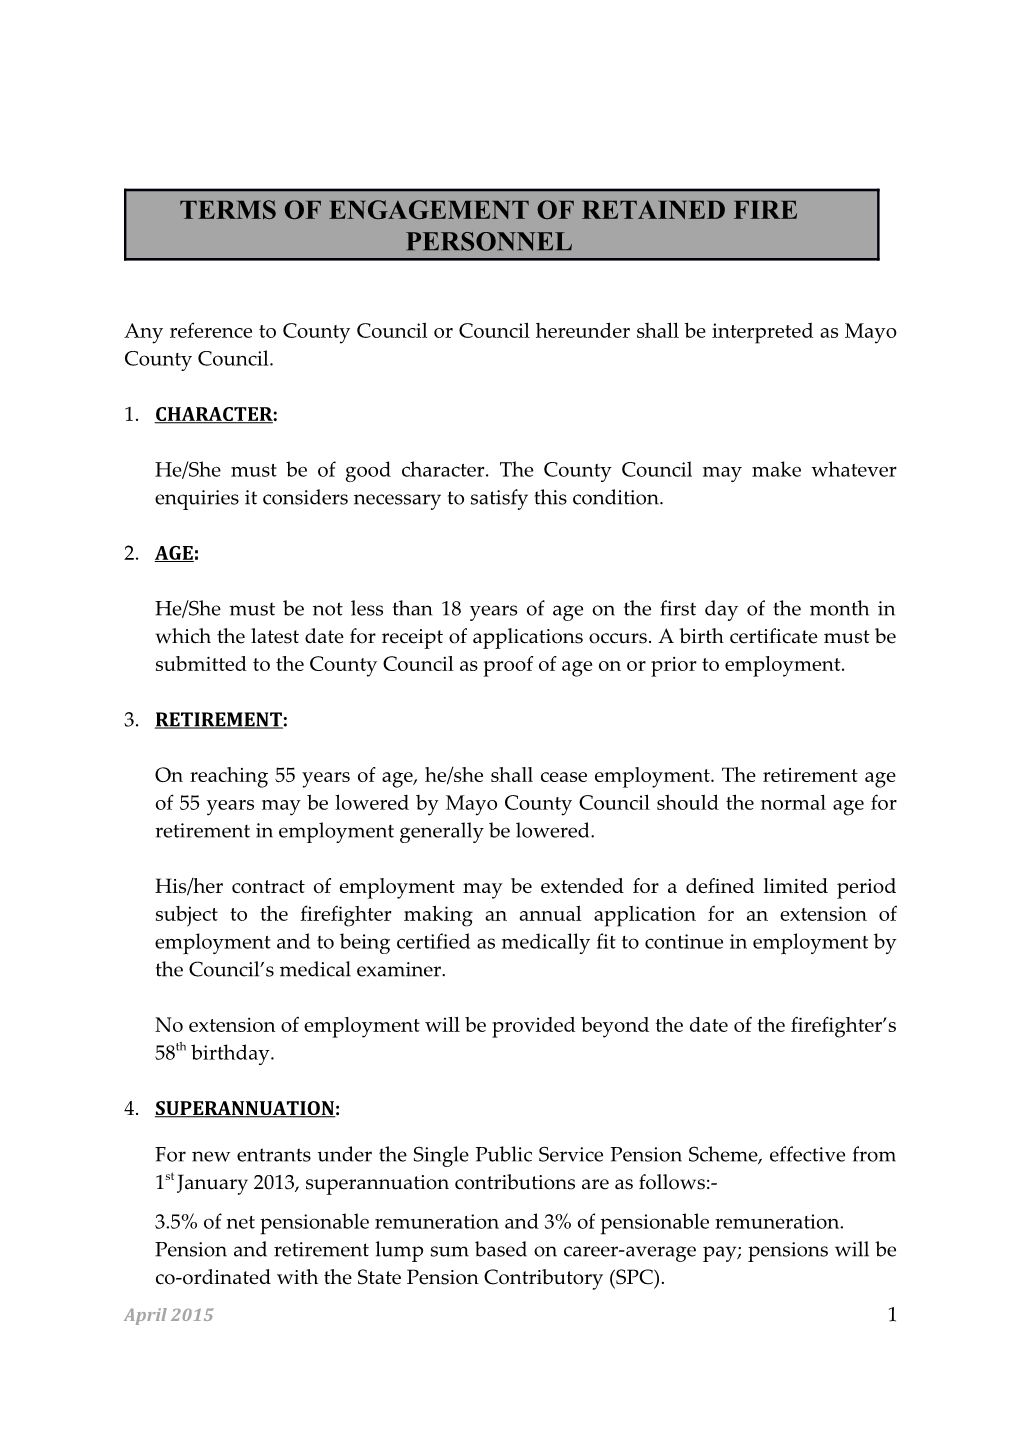 Terms of Engagement of Retained Fire Personnel